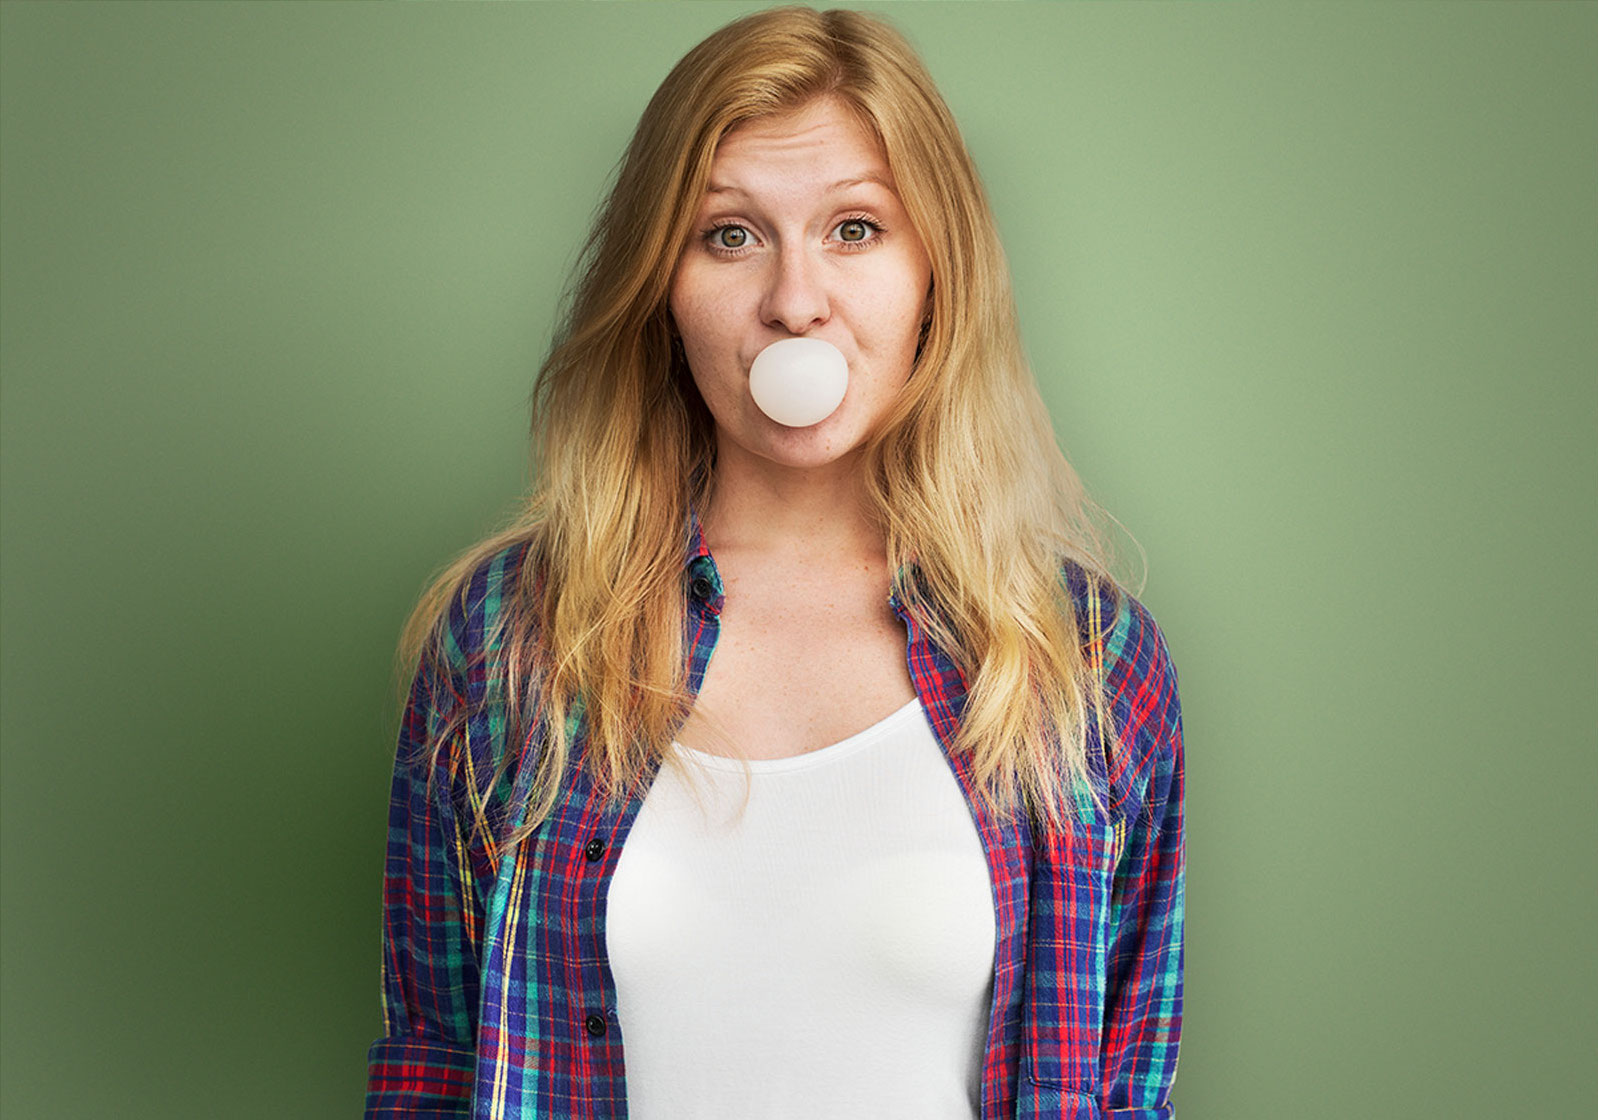 A young woman with a bubble gum